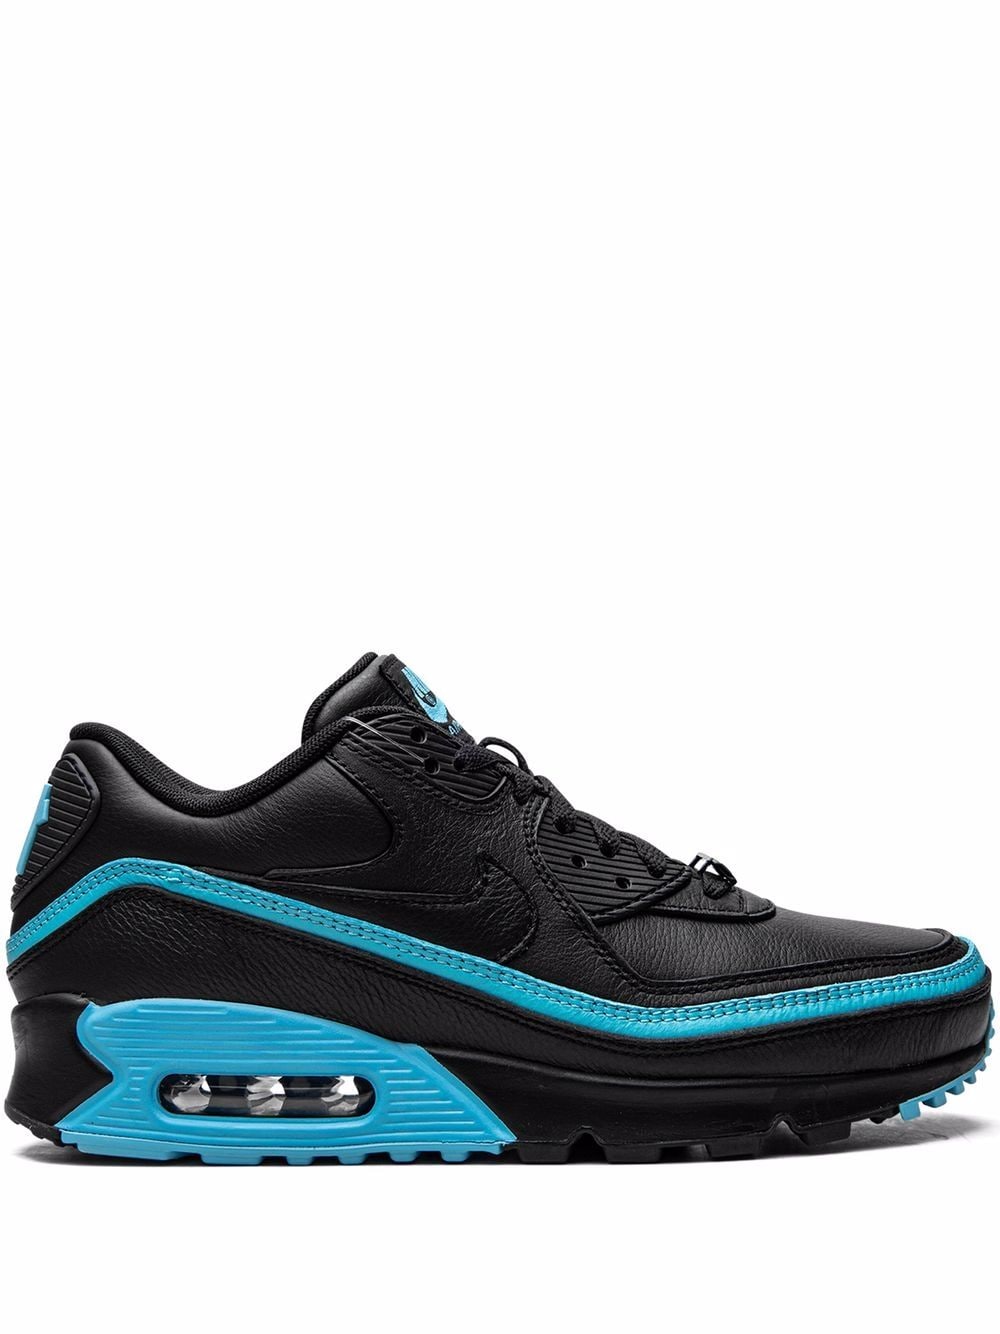 Nike x Undefeated Air Max 90 "Black/Blue Fury" sneakers von Nike